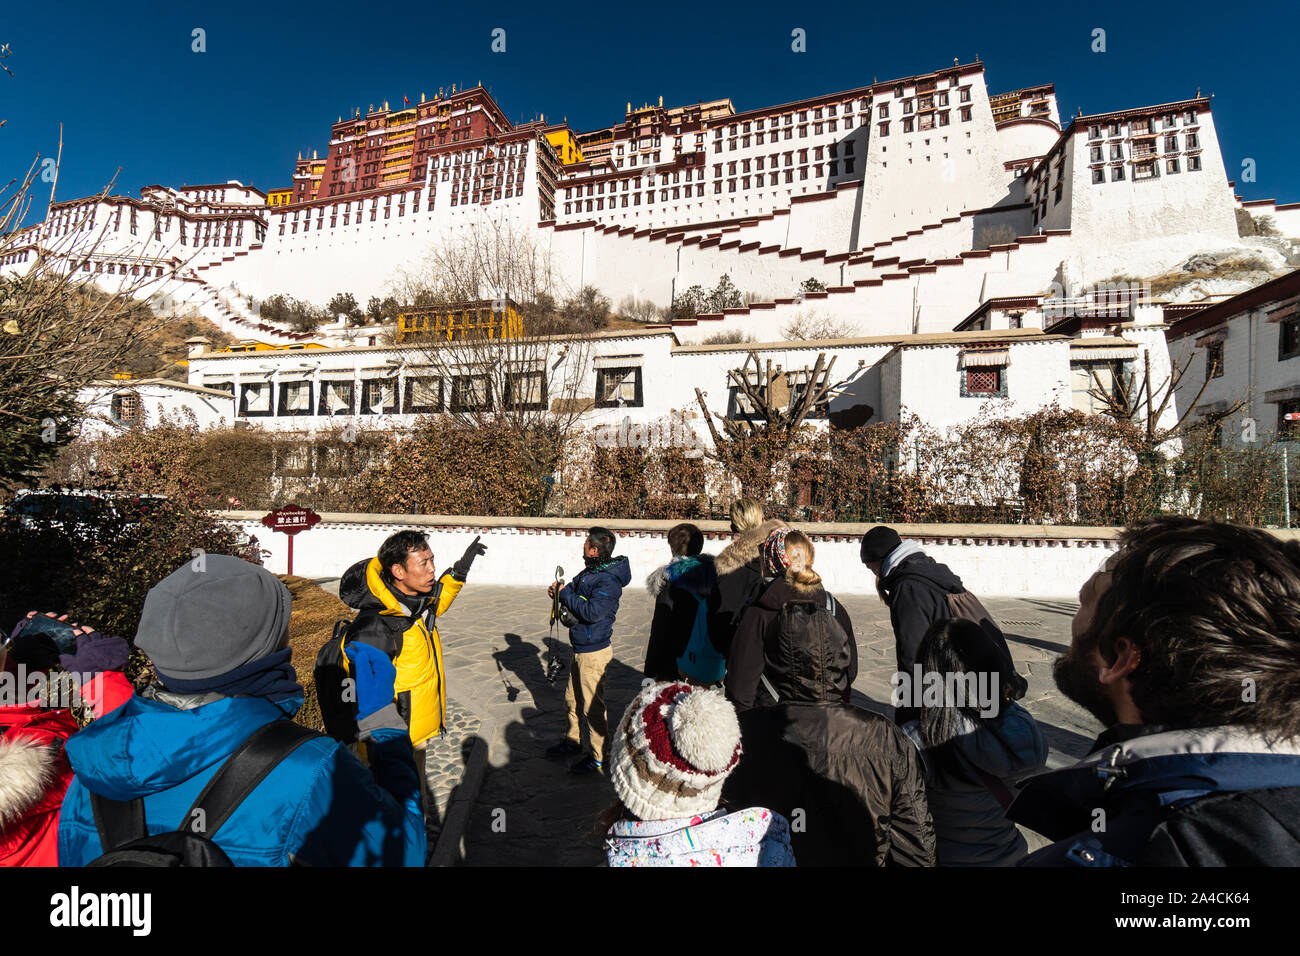 Lhasa, China - December 13 2018: International tourists listen to their tour guide about the Potala Palace in the heart of Lhasa old town in Tibet pro Stock Photo